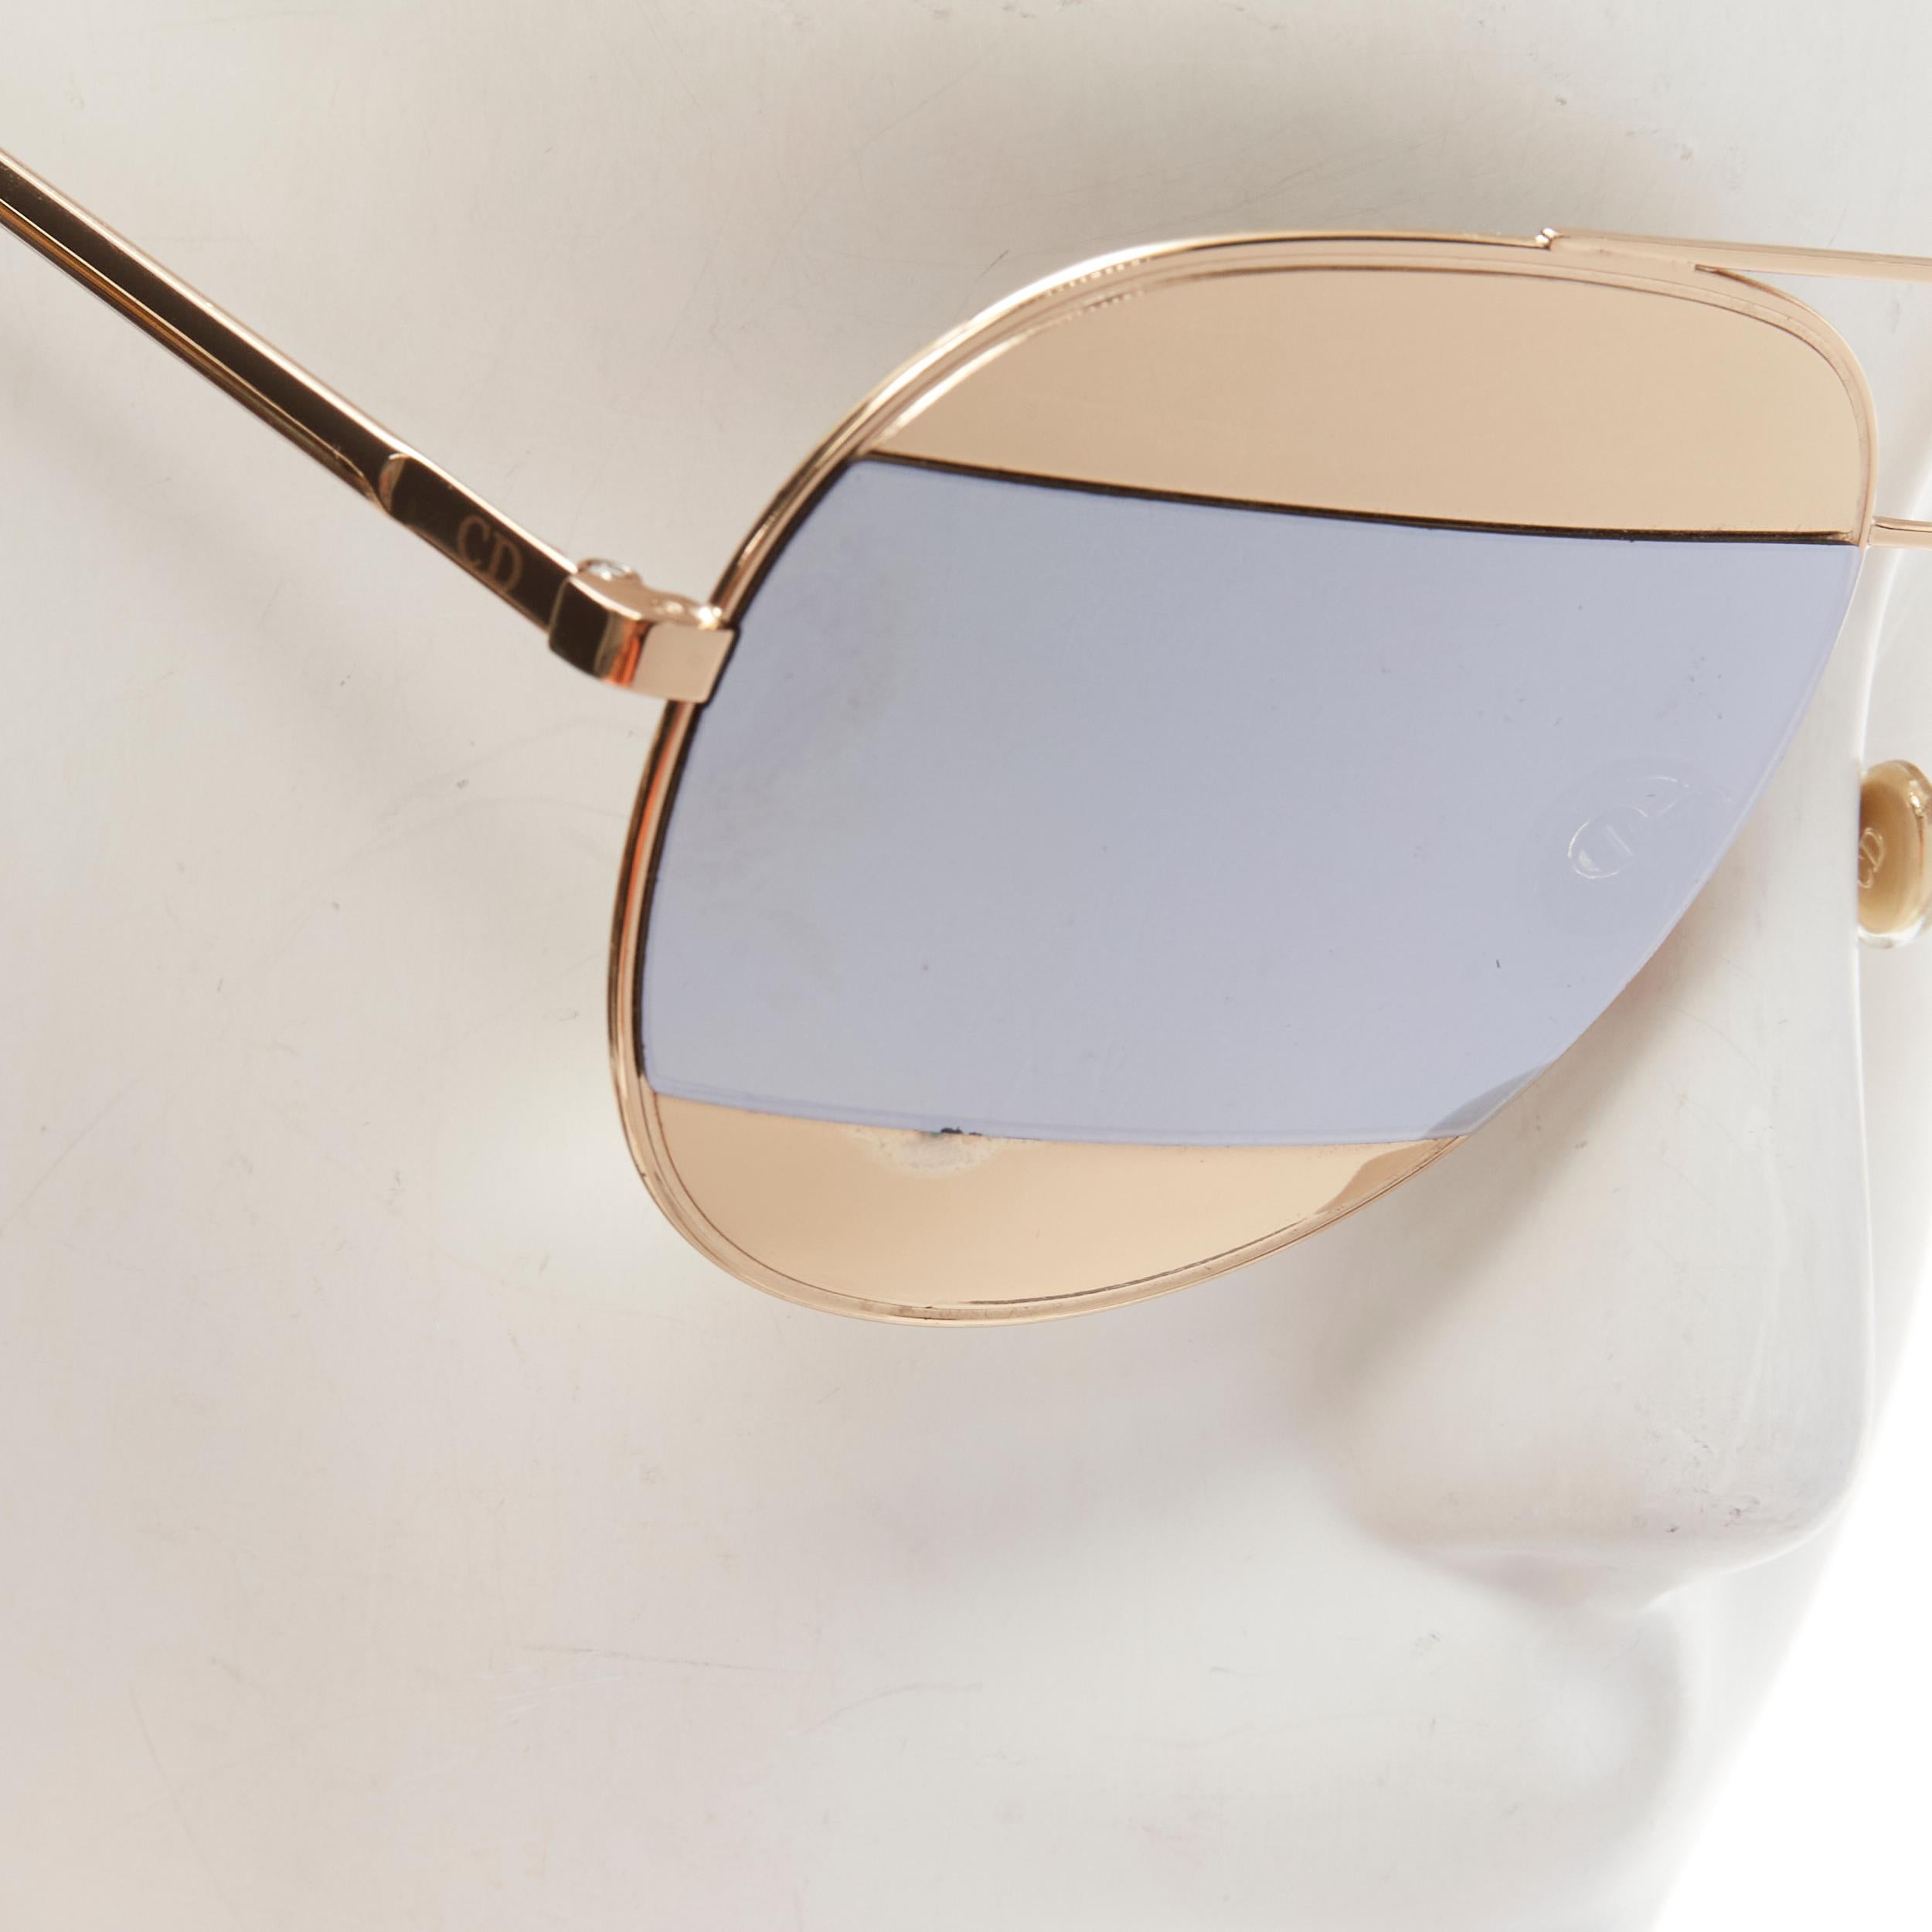 CHRISTIAN DIOR DiorSplit1 mirrored gold silver aviator sunglasses 
Reference: ANWU/A00090 
Brand: Dior 
Material: Metal 
Color: Gold 
Pattern: Solid 
Made in: Italy 


CONDITION: 
Condition: Good, this item was pre-owned and is in good condition.